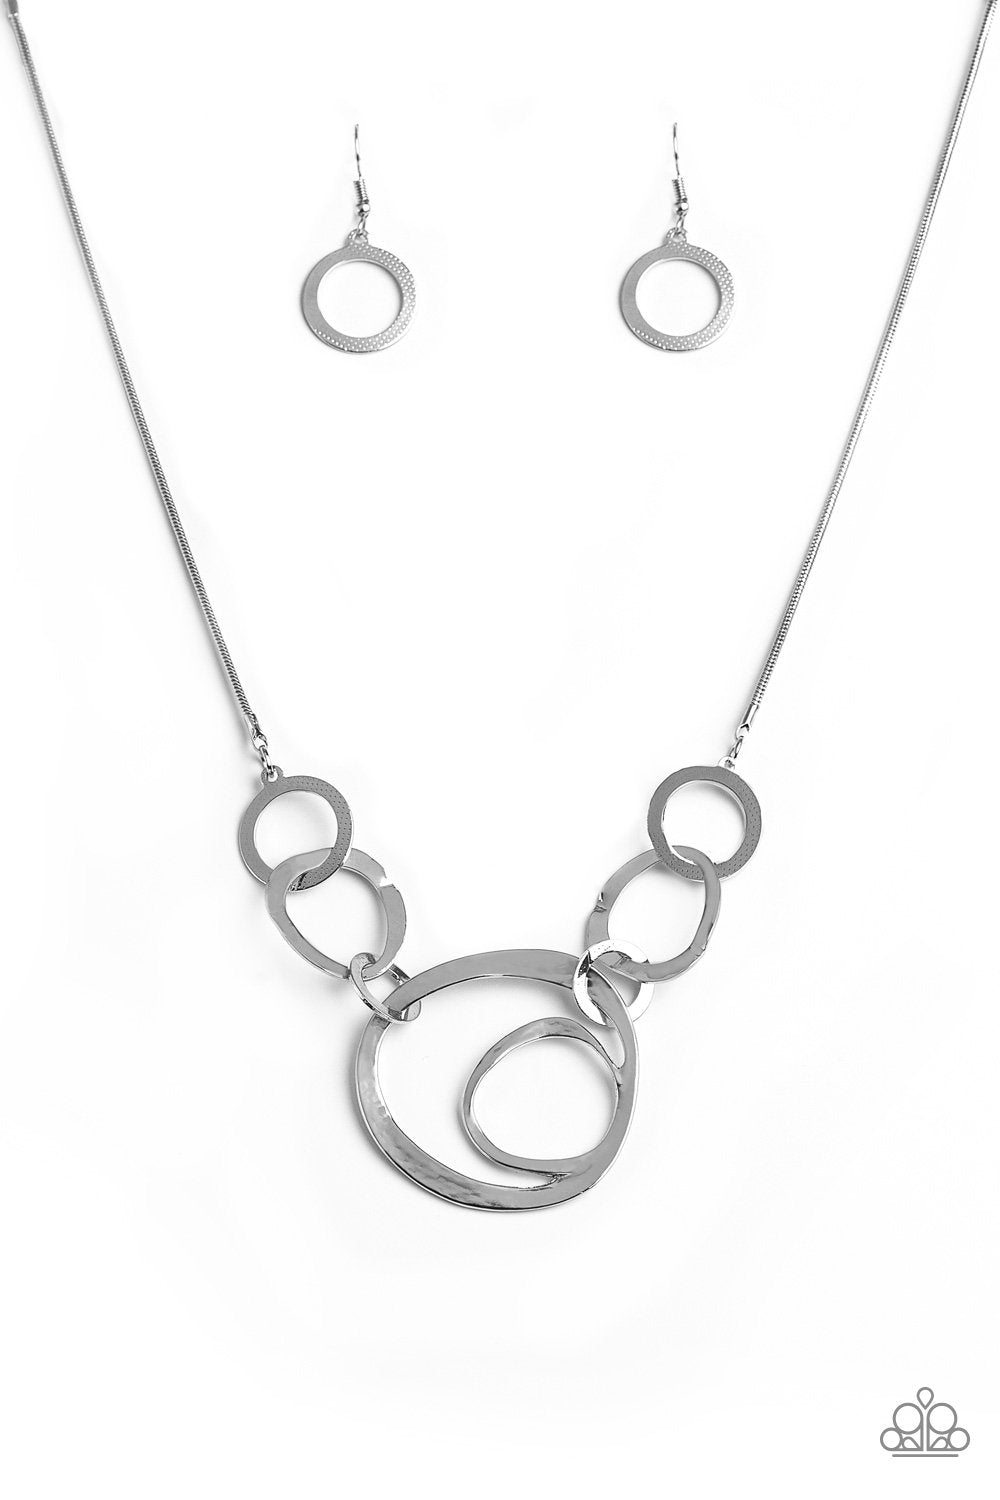 Progressively Vogue Silver Necklace - Paparazzi Accessories-CarasShop.com - $5 Jewelry by Cara Jewels